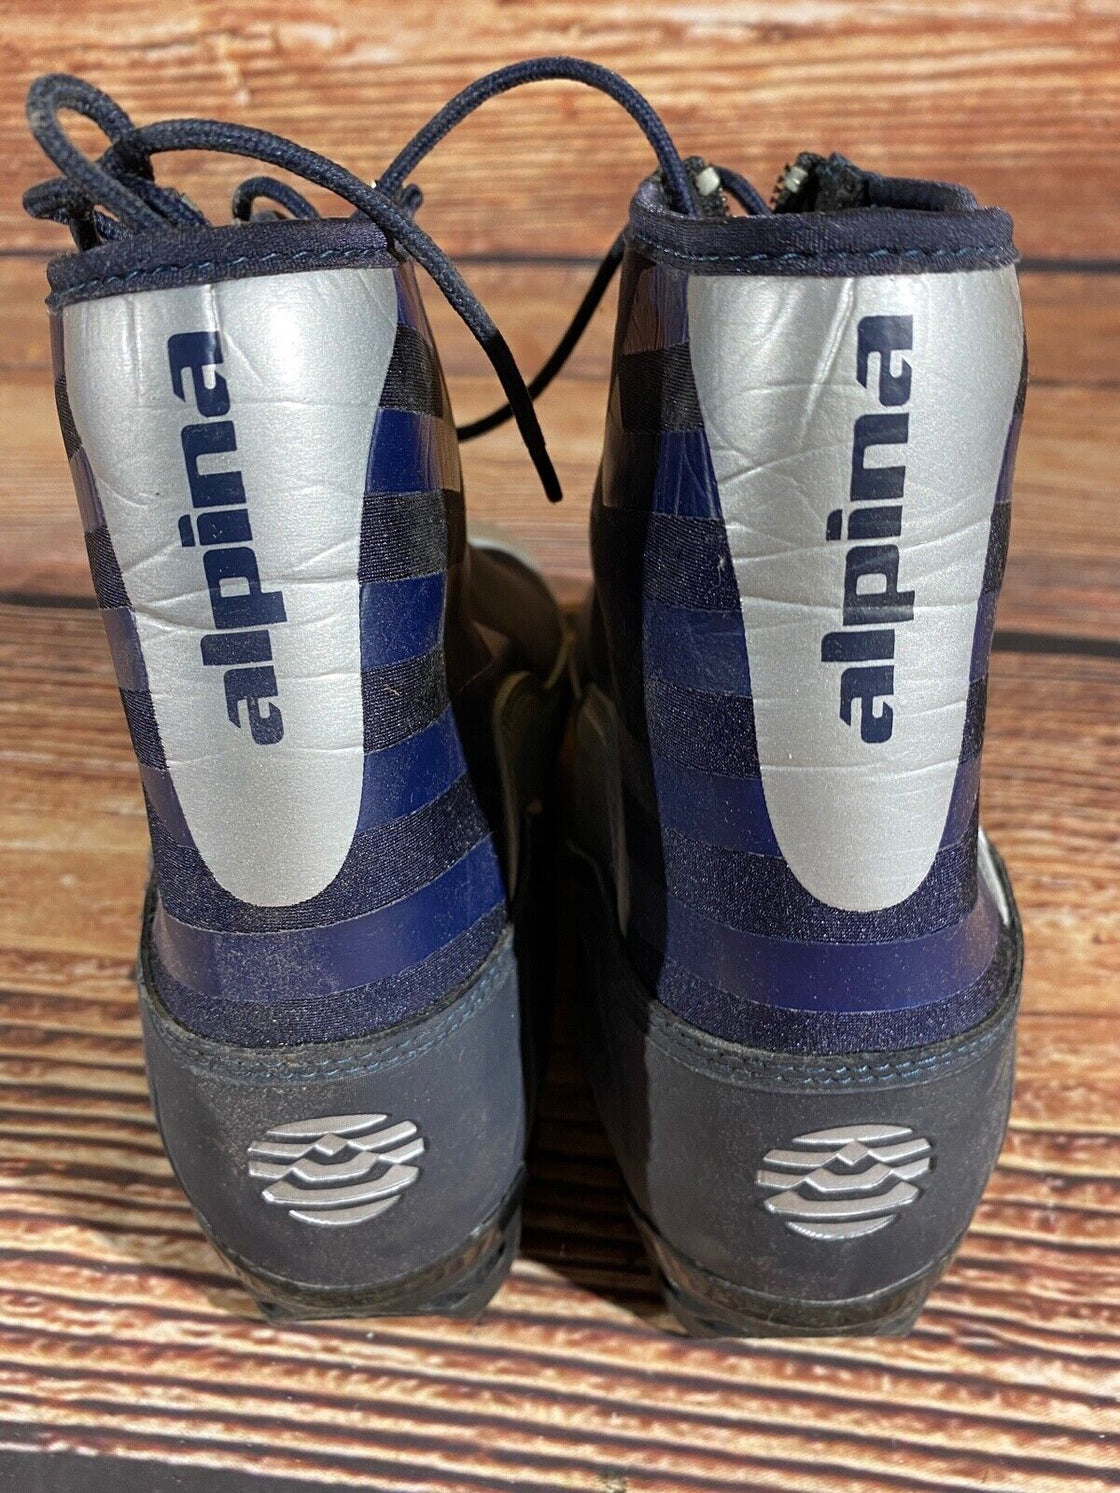 Alpina T10 Nordic Cross Country Ski Boots Size EU41 US8 for NNN